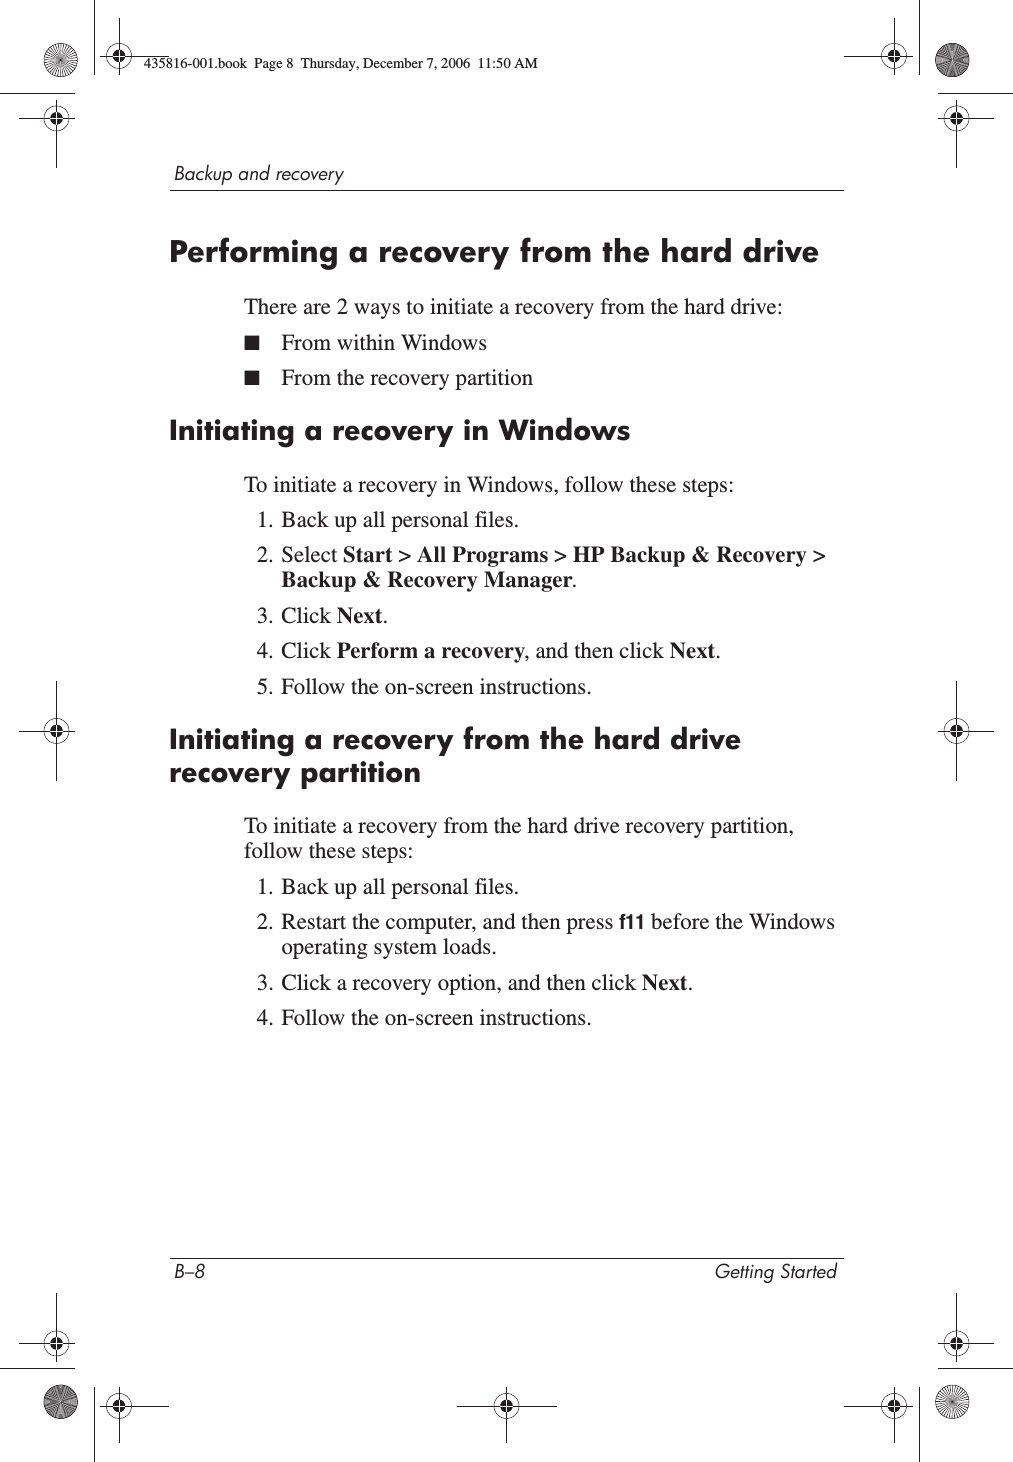 B–8 Getting StartedBackup and recoveryPerforming a recovery from the hard driveThere are 2 ways to initiate a recovery from the hard drive:■From within Windows■From the recovery partitionInitiating a recovery in WindowsTo initiate a recovery in Windows, follow these steps:1. Back up all personal files.2. Select Start &gt; All Programs &gt; HP Backup &amp; Recovery &gt; Backup &amp; Recovery Manager.3. Click Next.4. Click Perform a recovery, and then click Next.5. Follow the on-screen instructions.Initiating a recovery from the hard drive recovery partitionTo initiate a recovery from the hard drive recovery partition, follow these steps:1. Back up all personal files.2. Restart the computer, and then press f11 before the Windows operating system loads.3. Click a recovery option, and then click Next.4. Follow the on-screen instructions.435816-001.book  Page 8  Thursday, December 7, 2006  11:50 AM